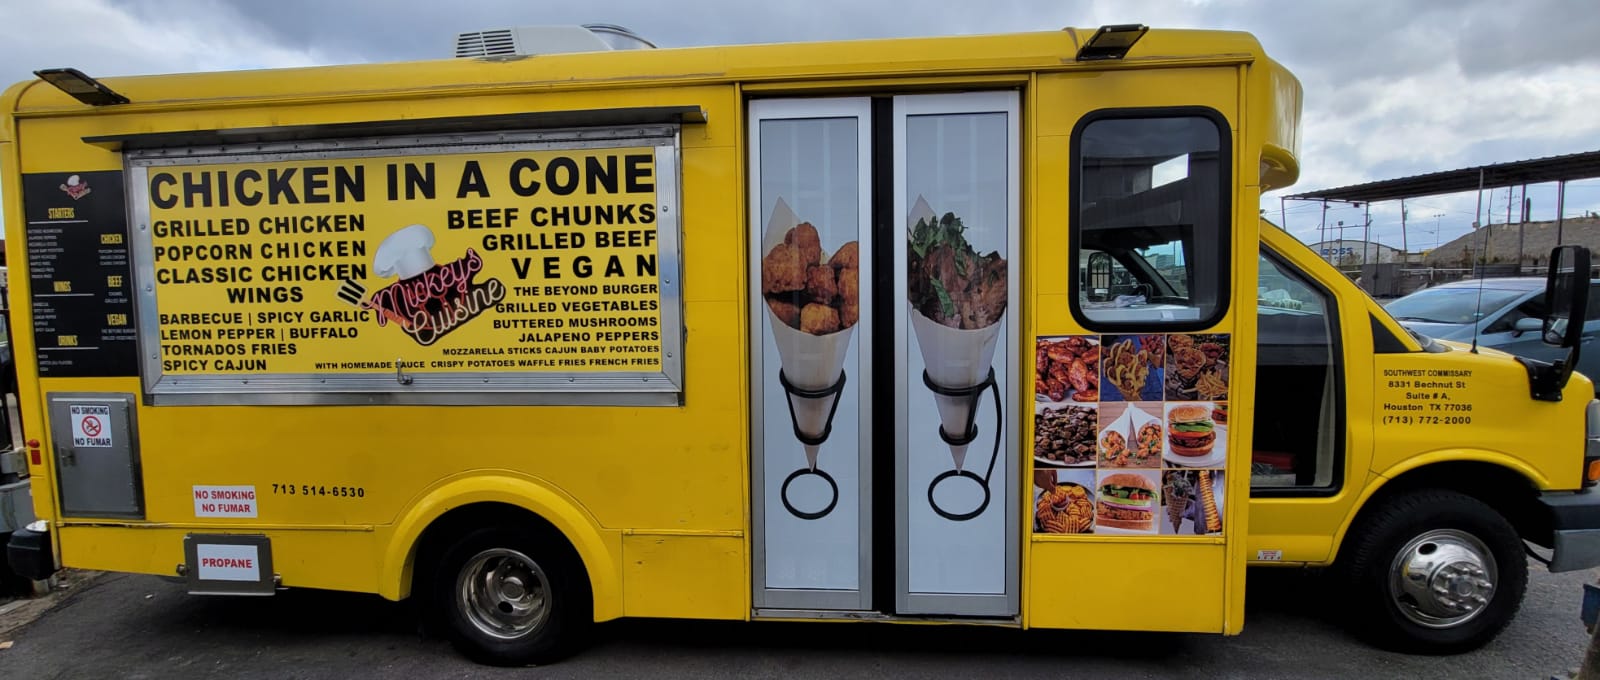 Apartments in Uptown Houston, Galleria Area Chicken in a cone food truck serving delicious dishes goes hand in hand with the vibrant food scene of Uptown Houston. With tantalizing flavors that won't disappoint, this mobile eatery is a must